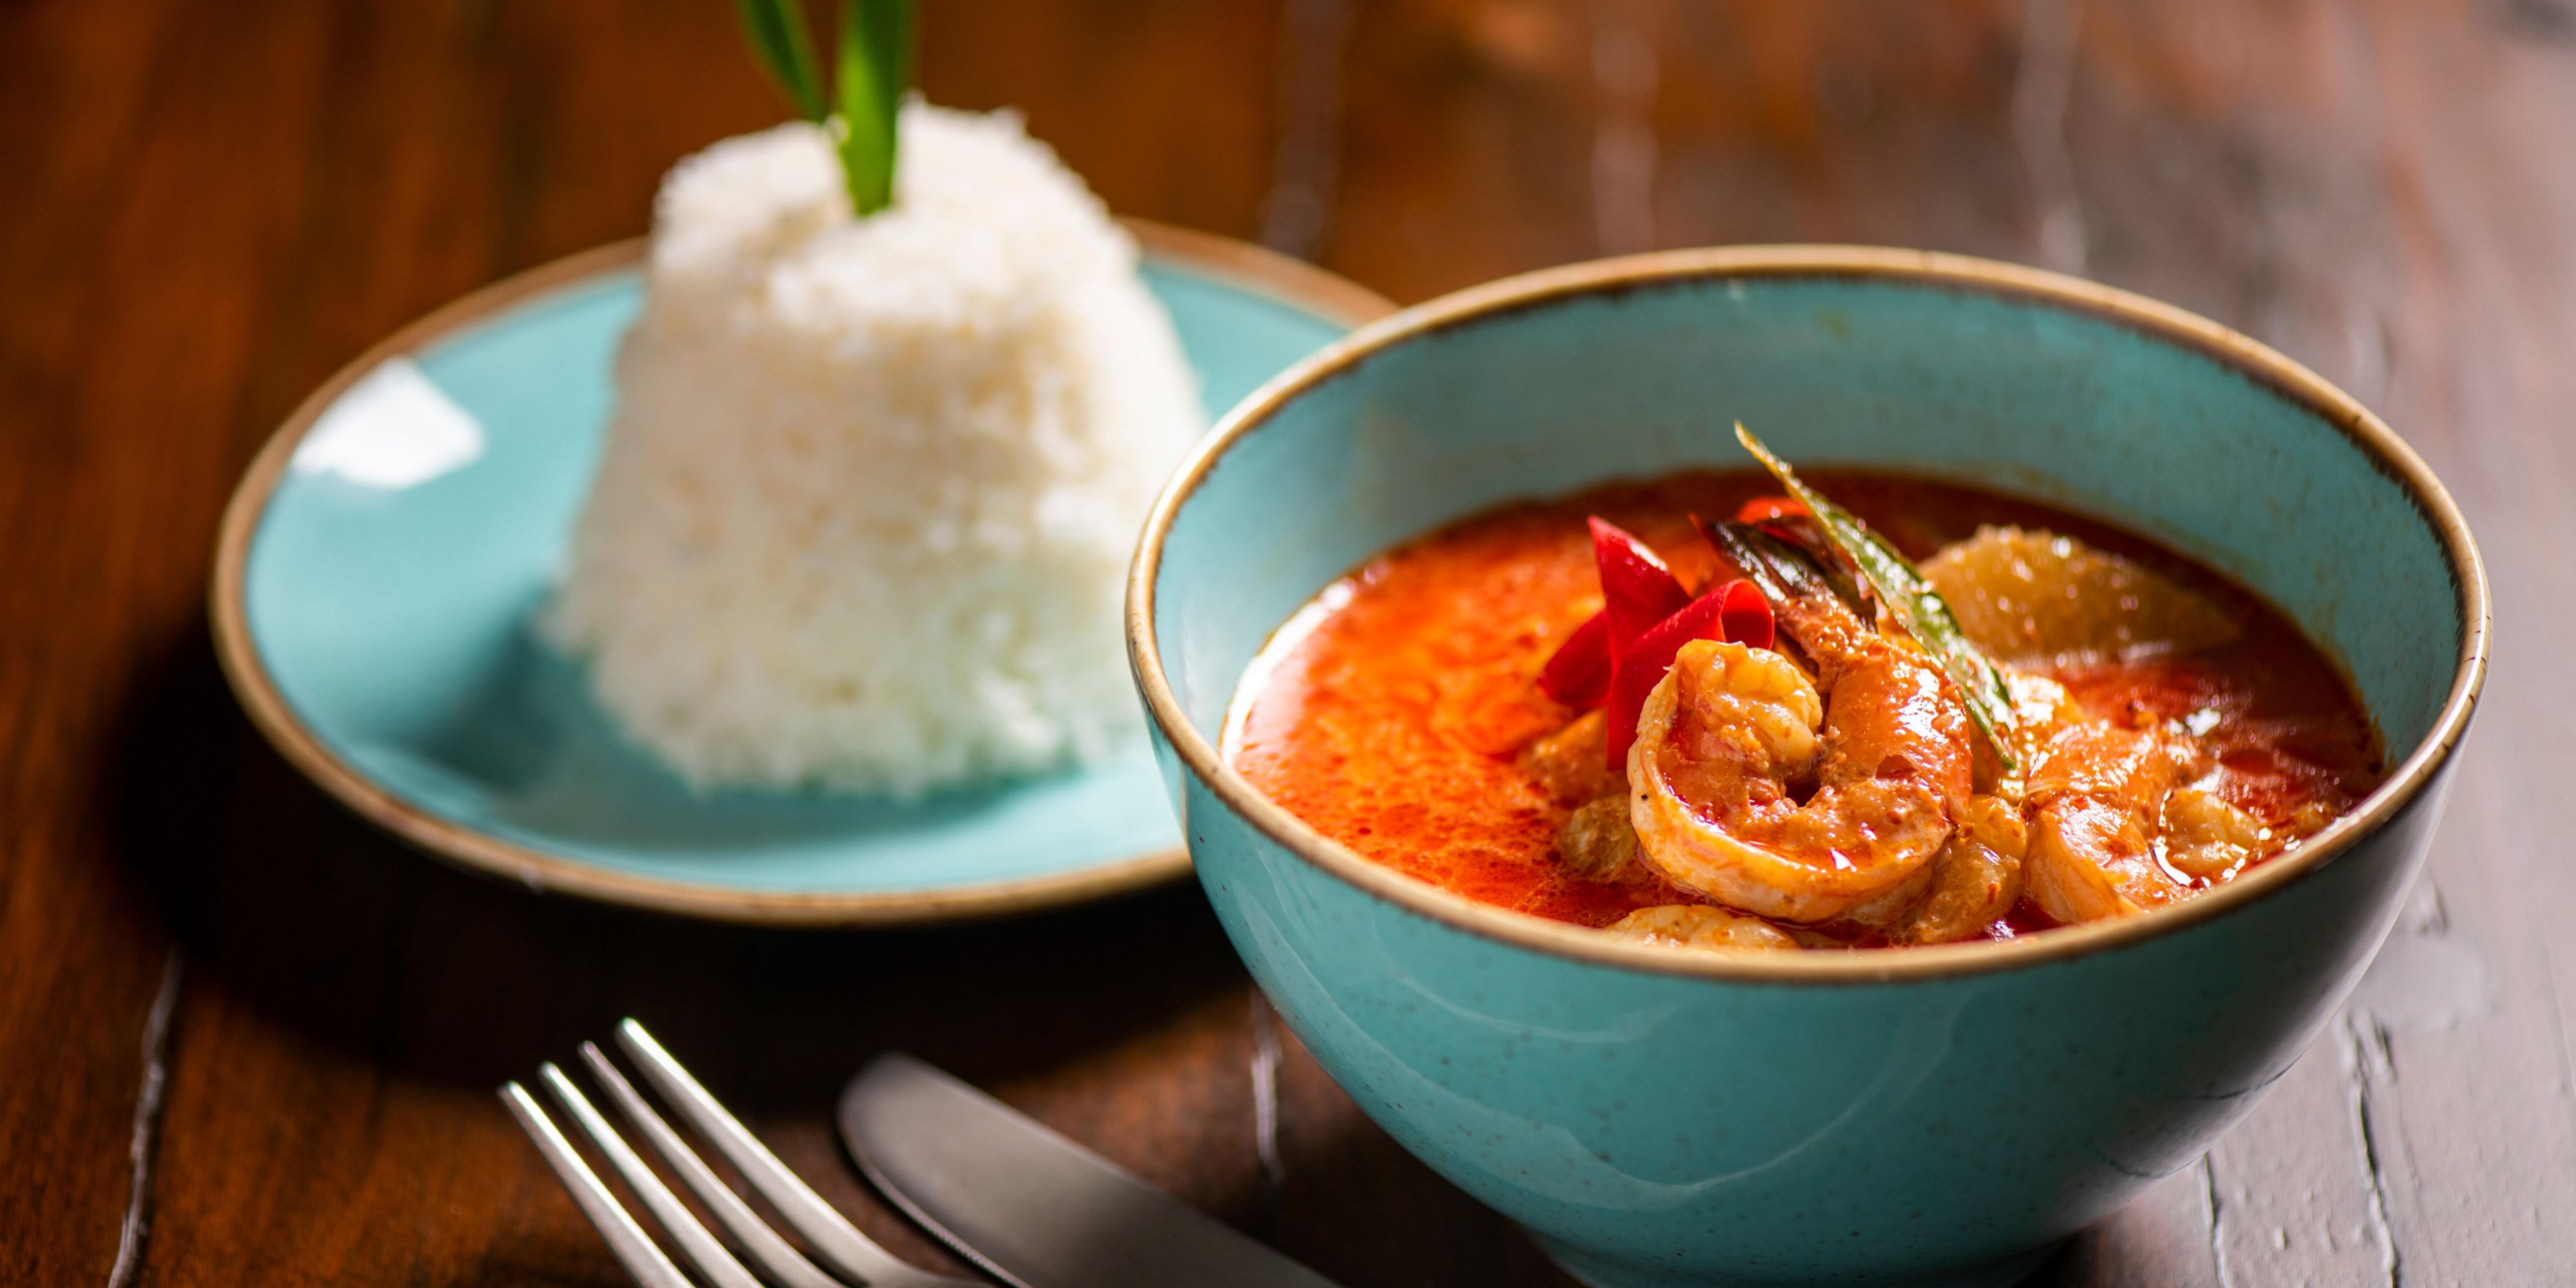 Definitely our signature dish. Only in Charm Thai